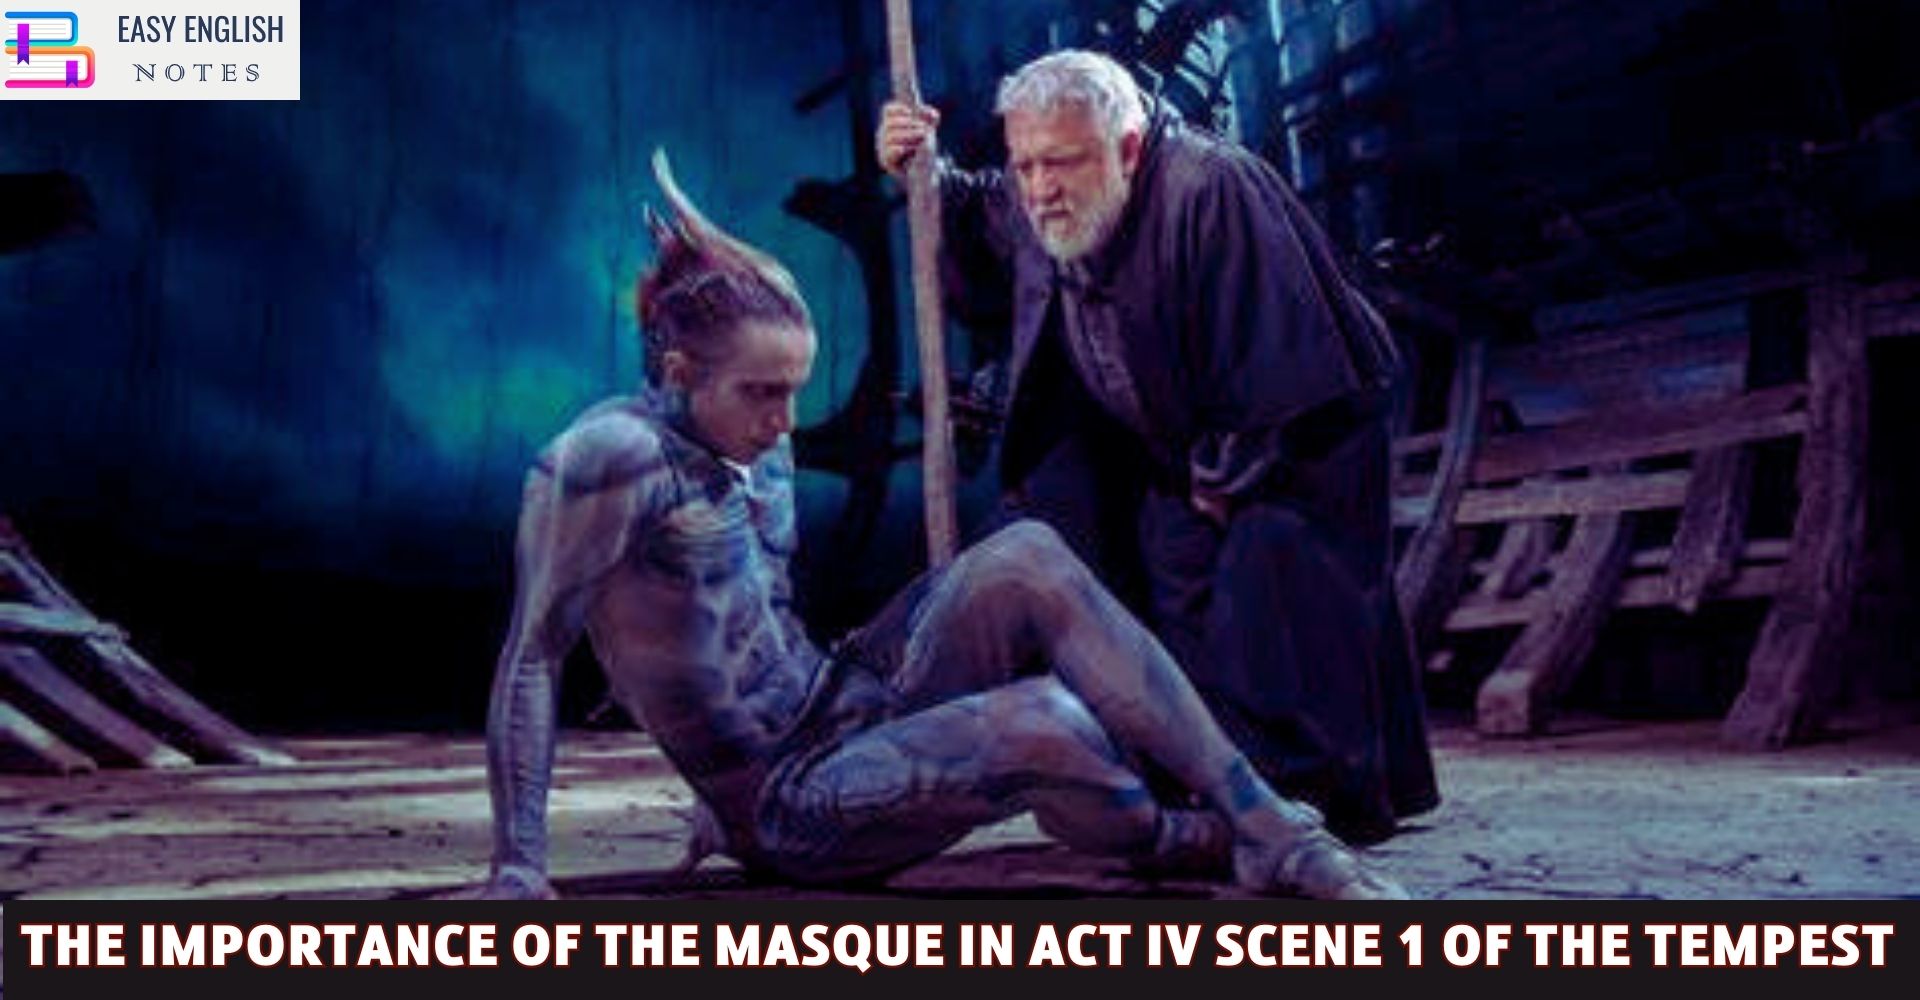 The Importance of the Masque in Act IV Scene 1 of The Tempest